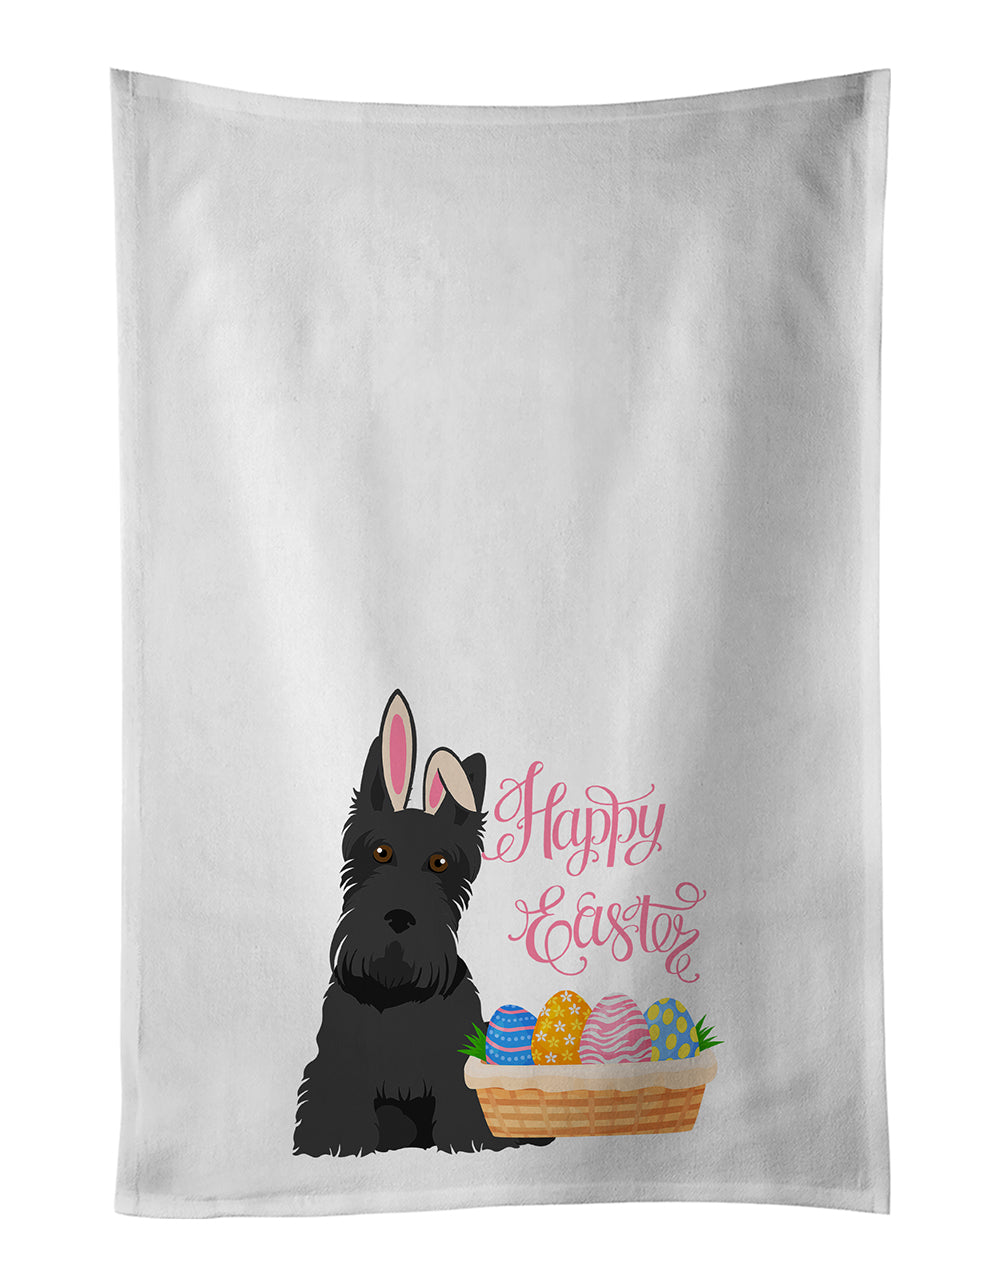 Buy this Black Scottish Terrier Easter White Kitchen Towel Set of 2 Dish Towels